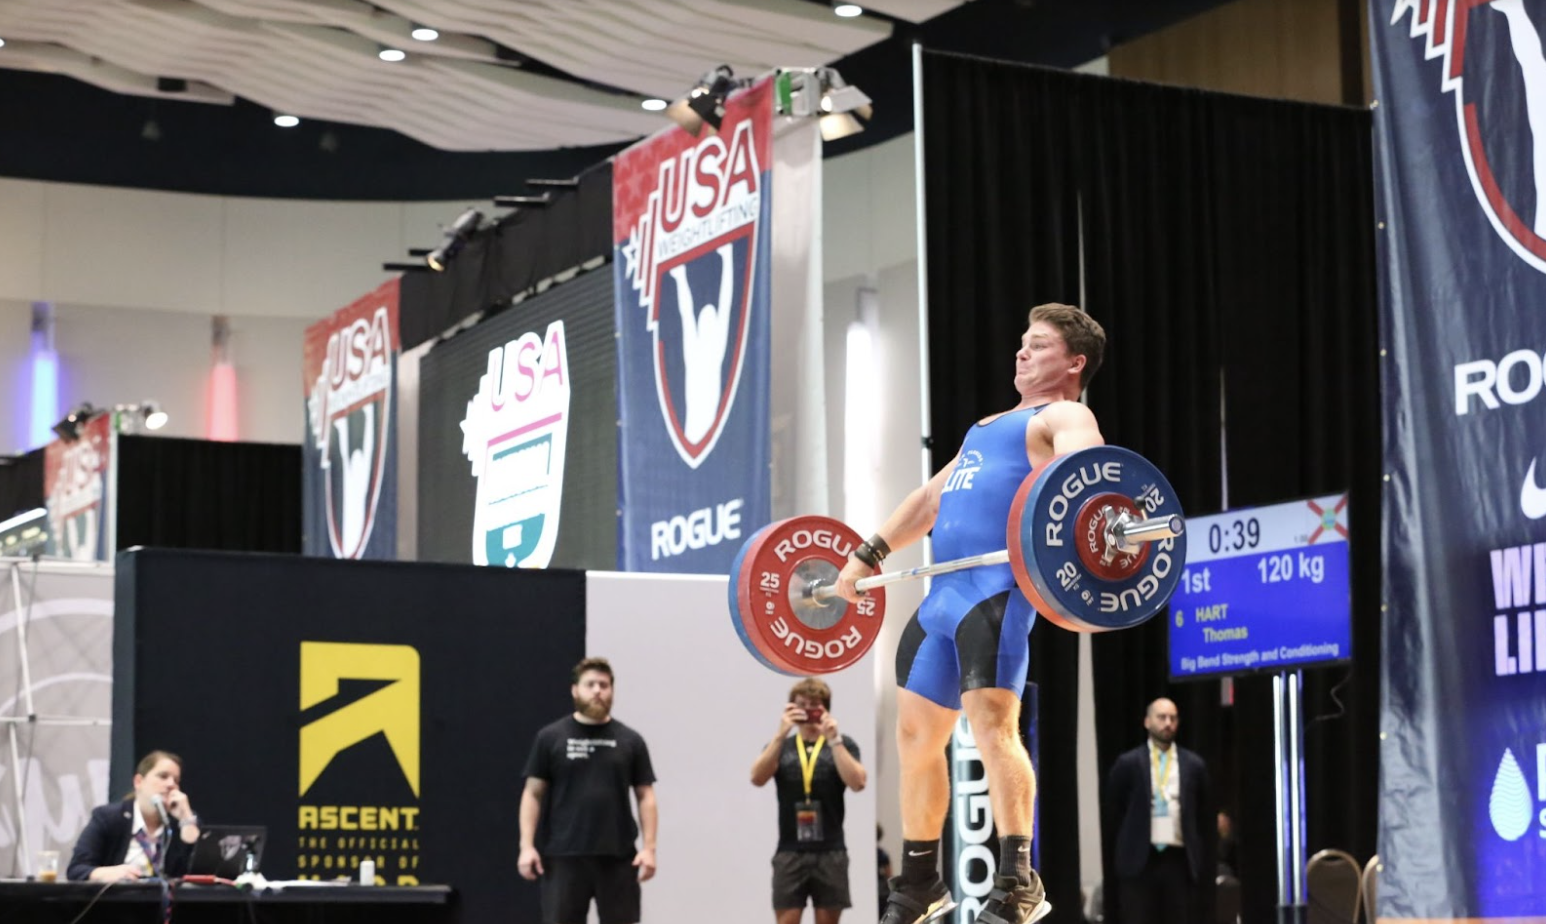 Olympic Weightlifting athlete performing the snatch movement